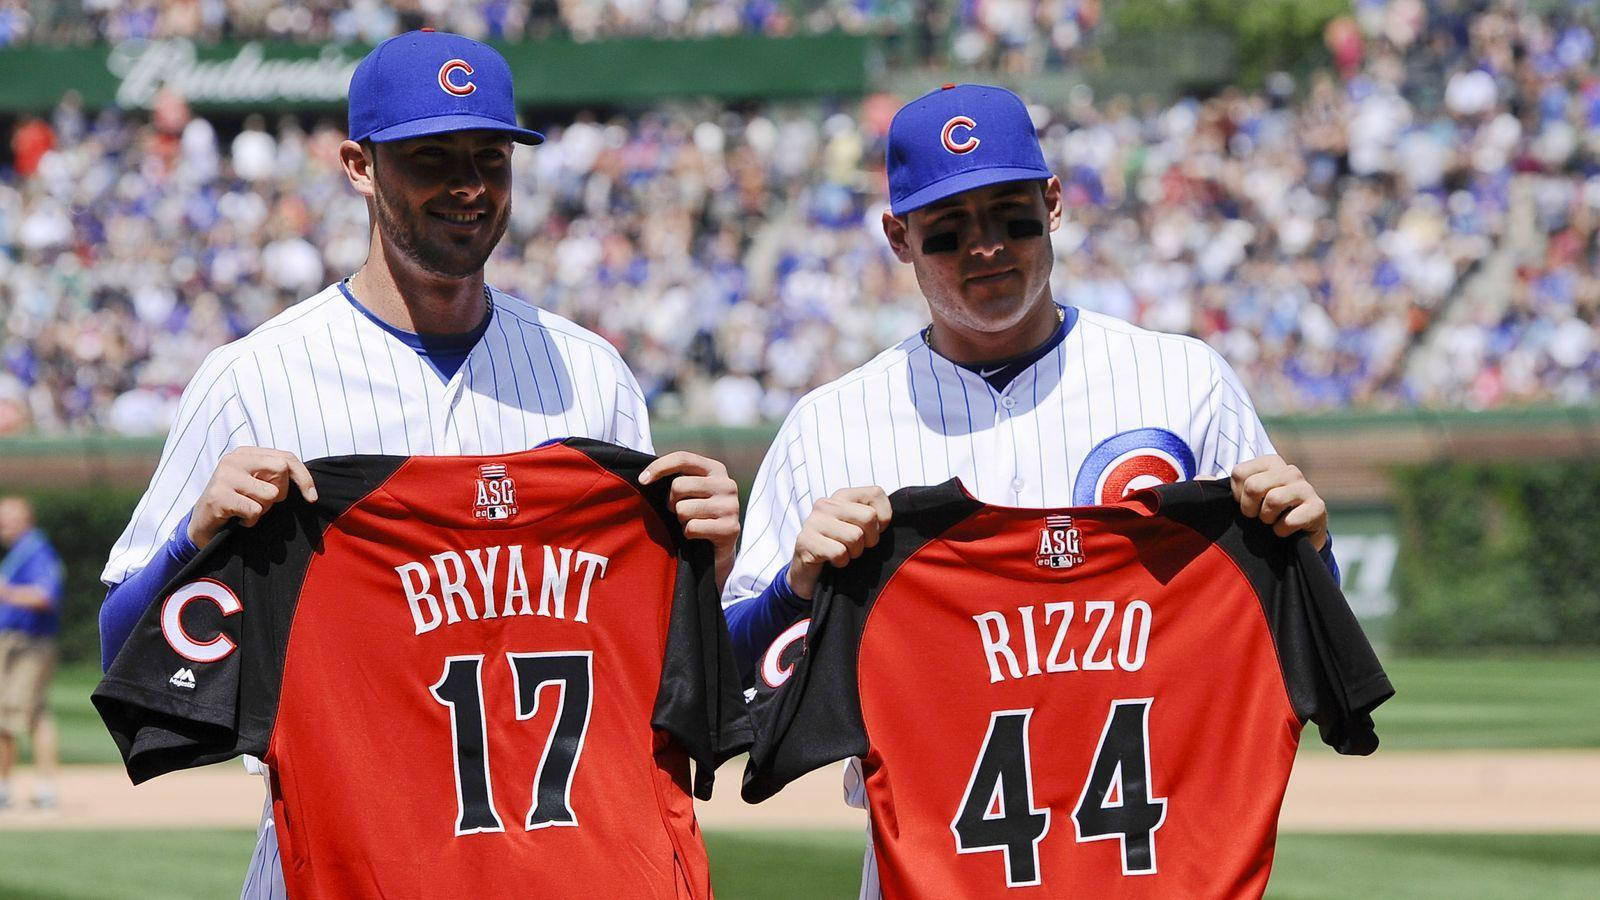 Download Anthony Rizzo Bryant ASG Jerseys Wallpaper